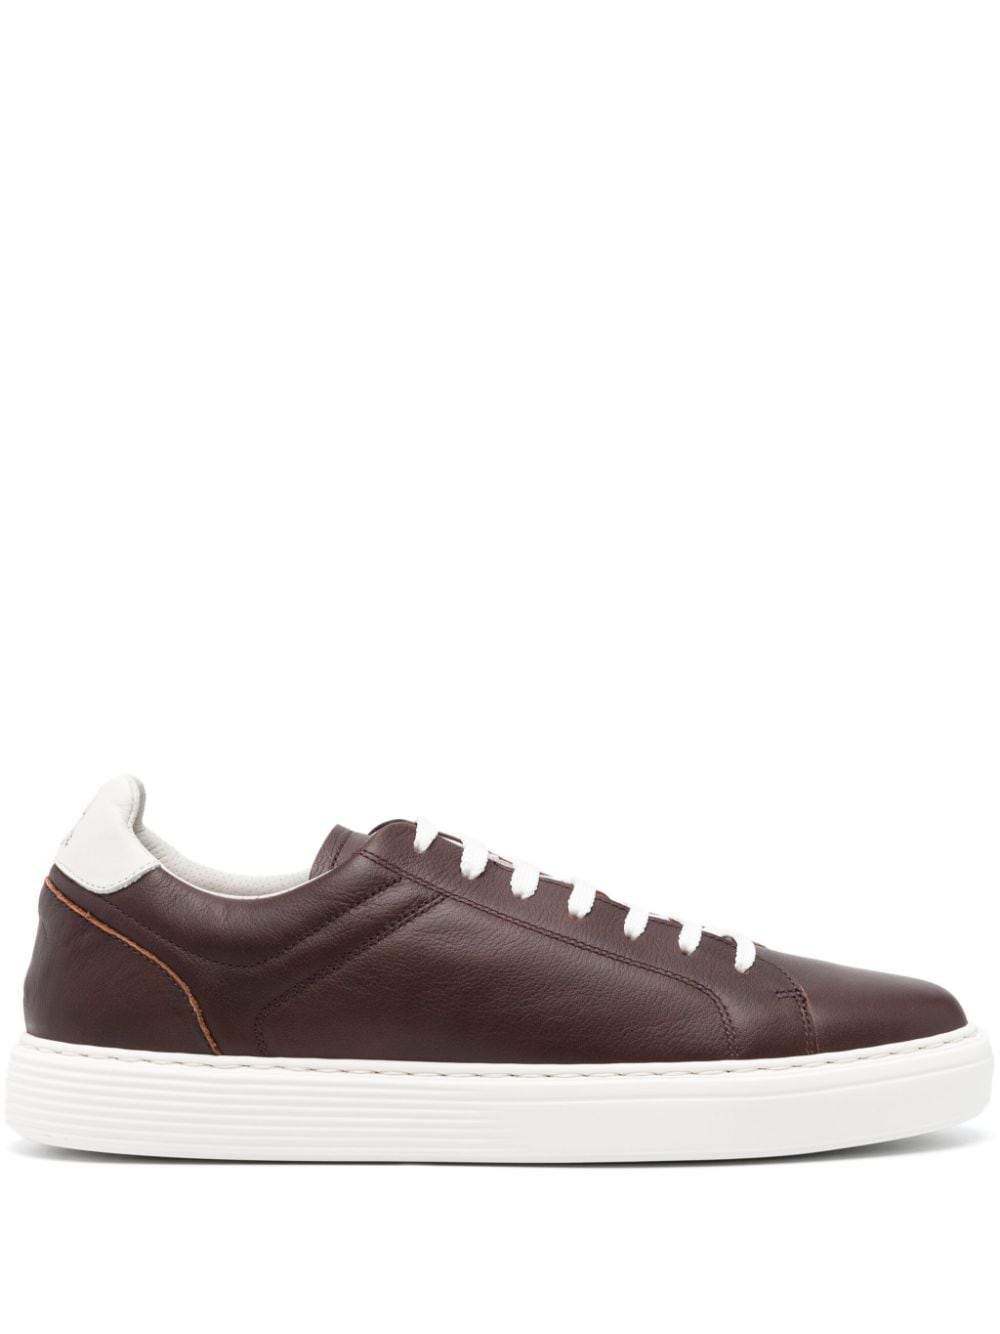 Brunello Cucinelli lace-up leather sneakers - Bruin